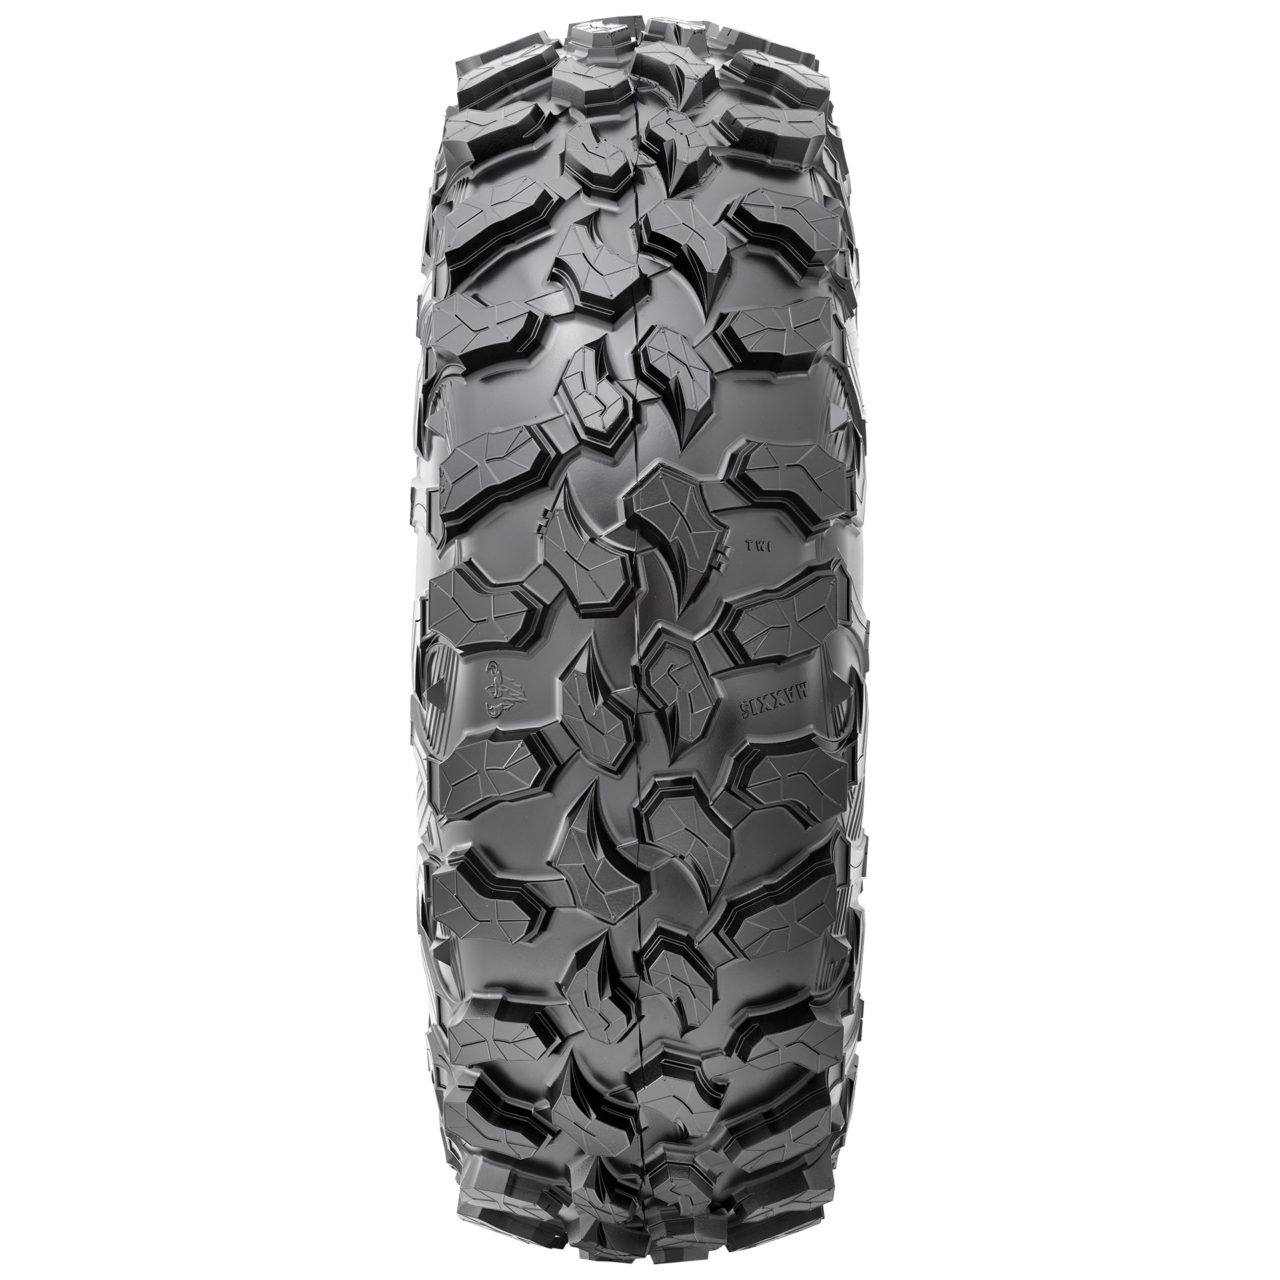 Maxxis Carnivore UTV/side by side tire product image